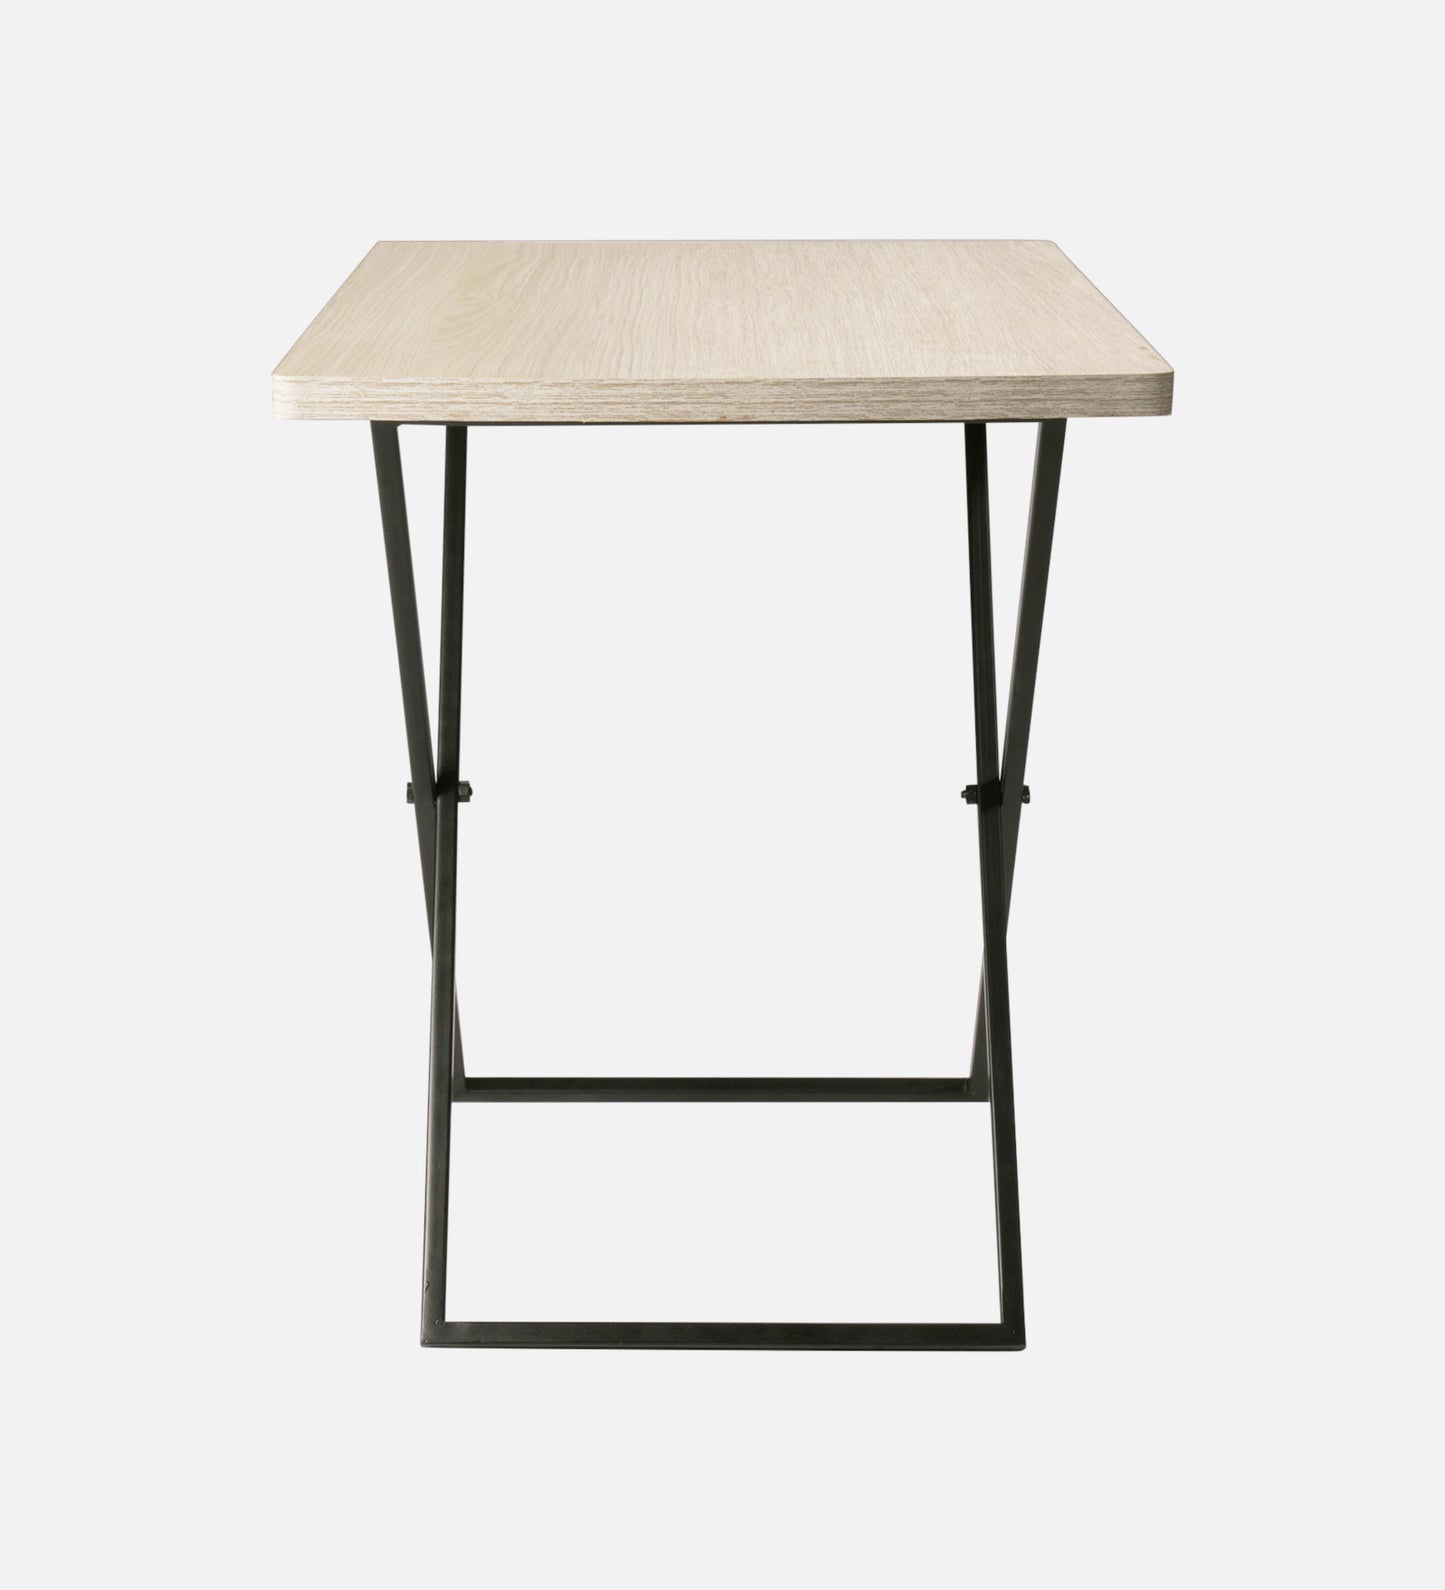 Pine Hues Criss Cross Side Tables, Writing Tables, Wooden Tables, Kids Tables, End Tables Living Room Decor by A Tiny Mistake